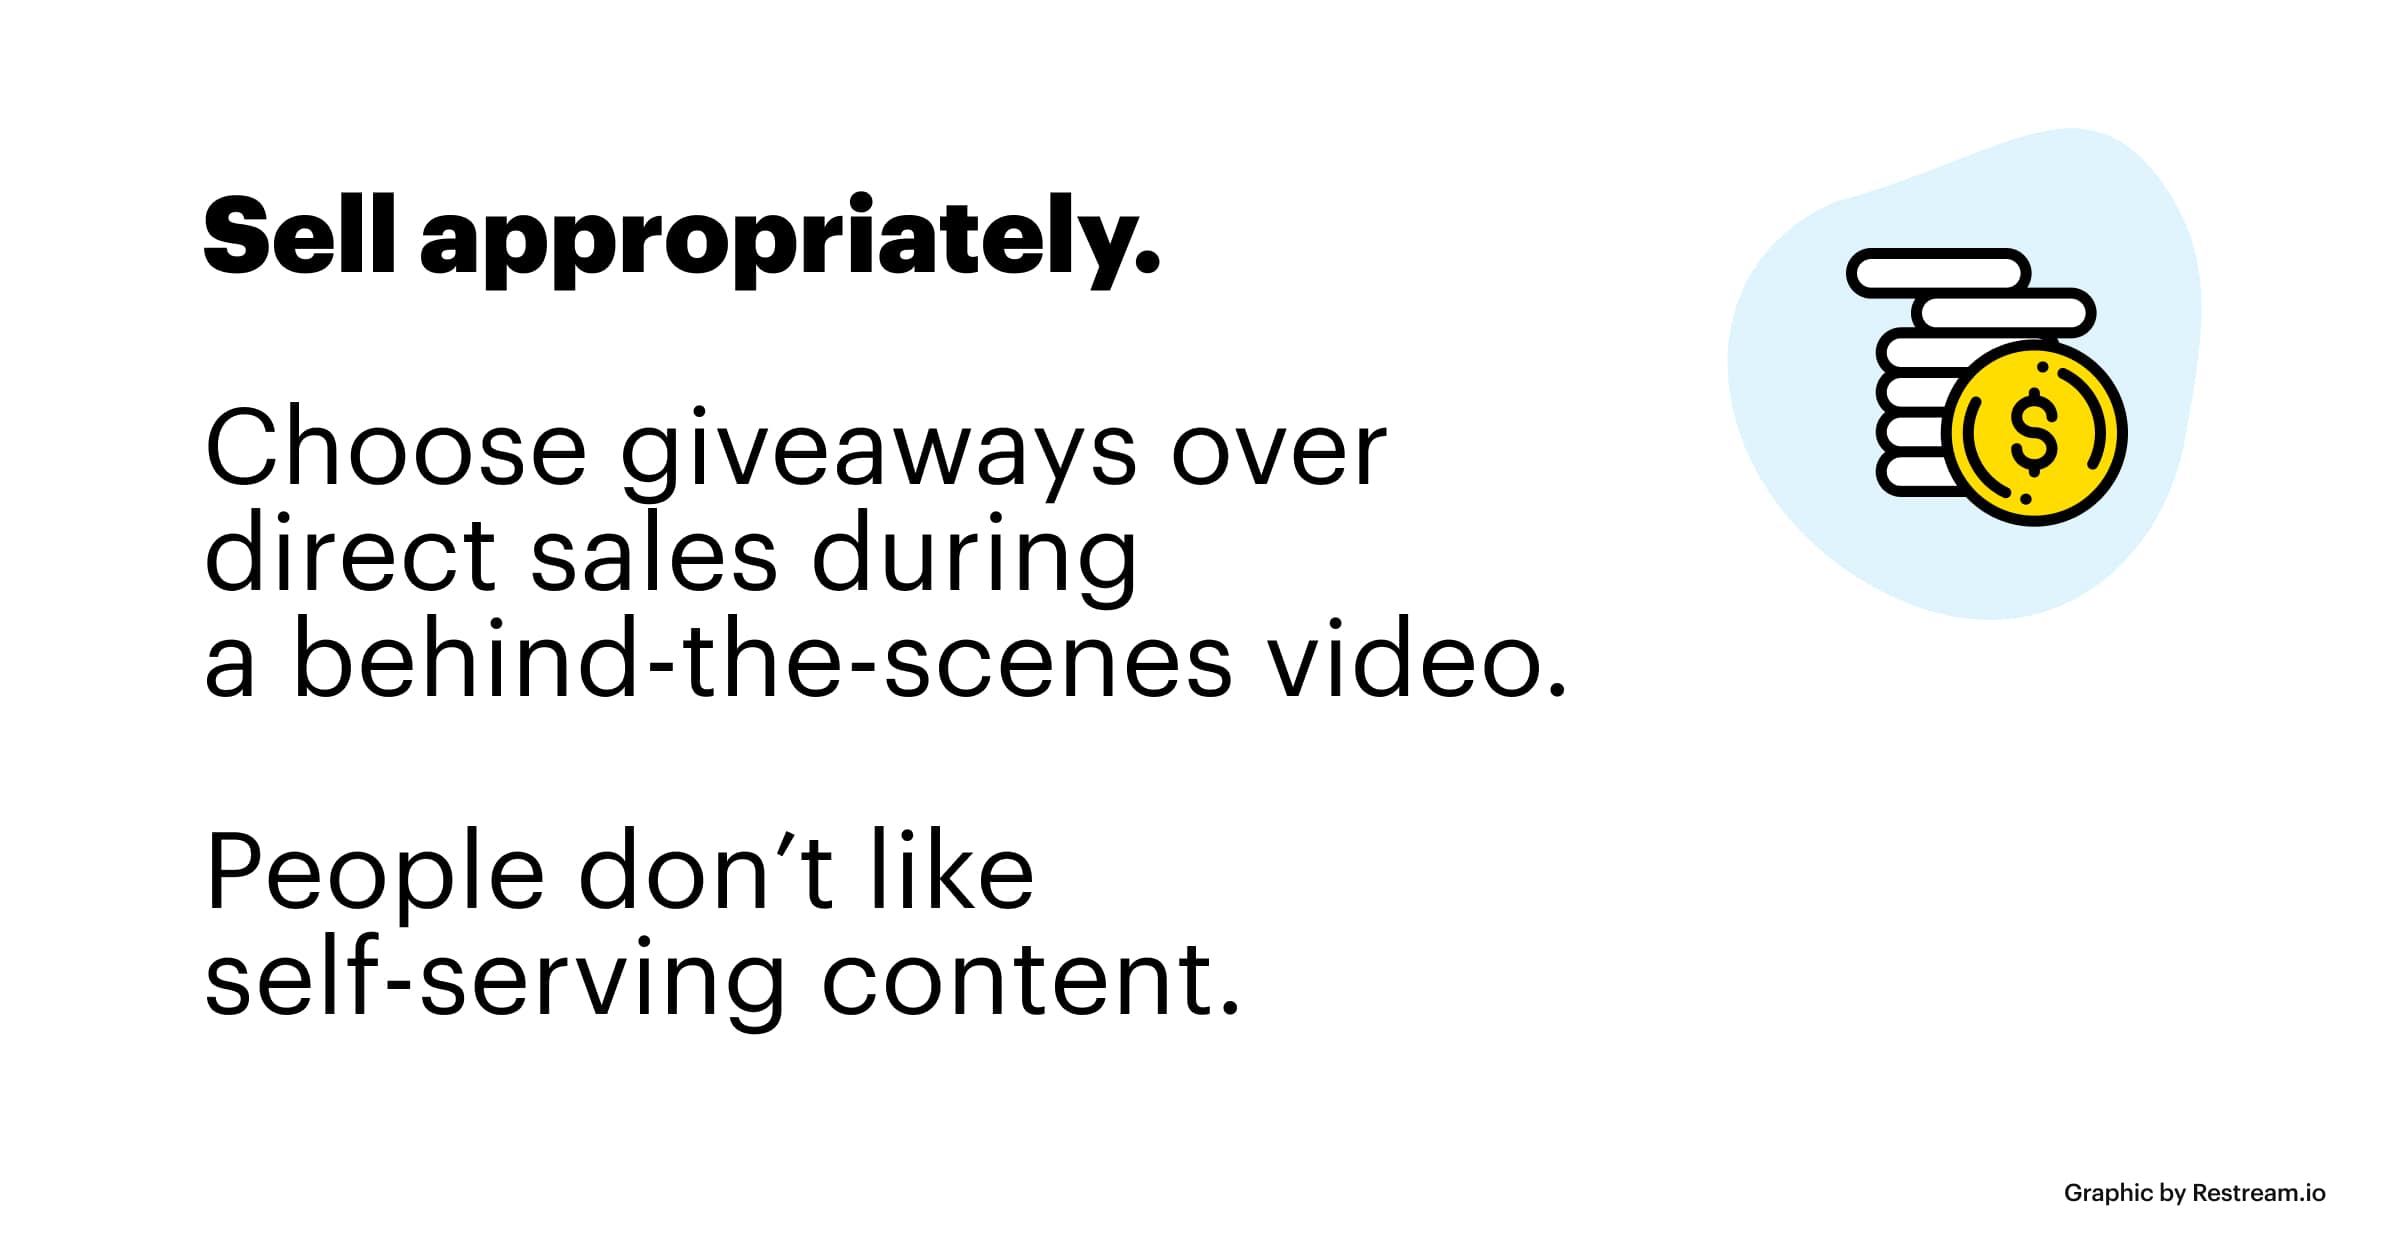 Sell appropriately - choose giveaways over direct sales during a behind-the-scenes video